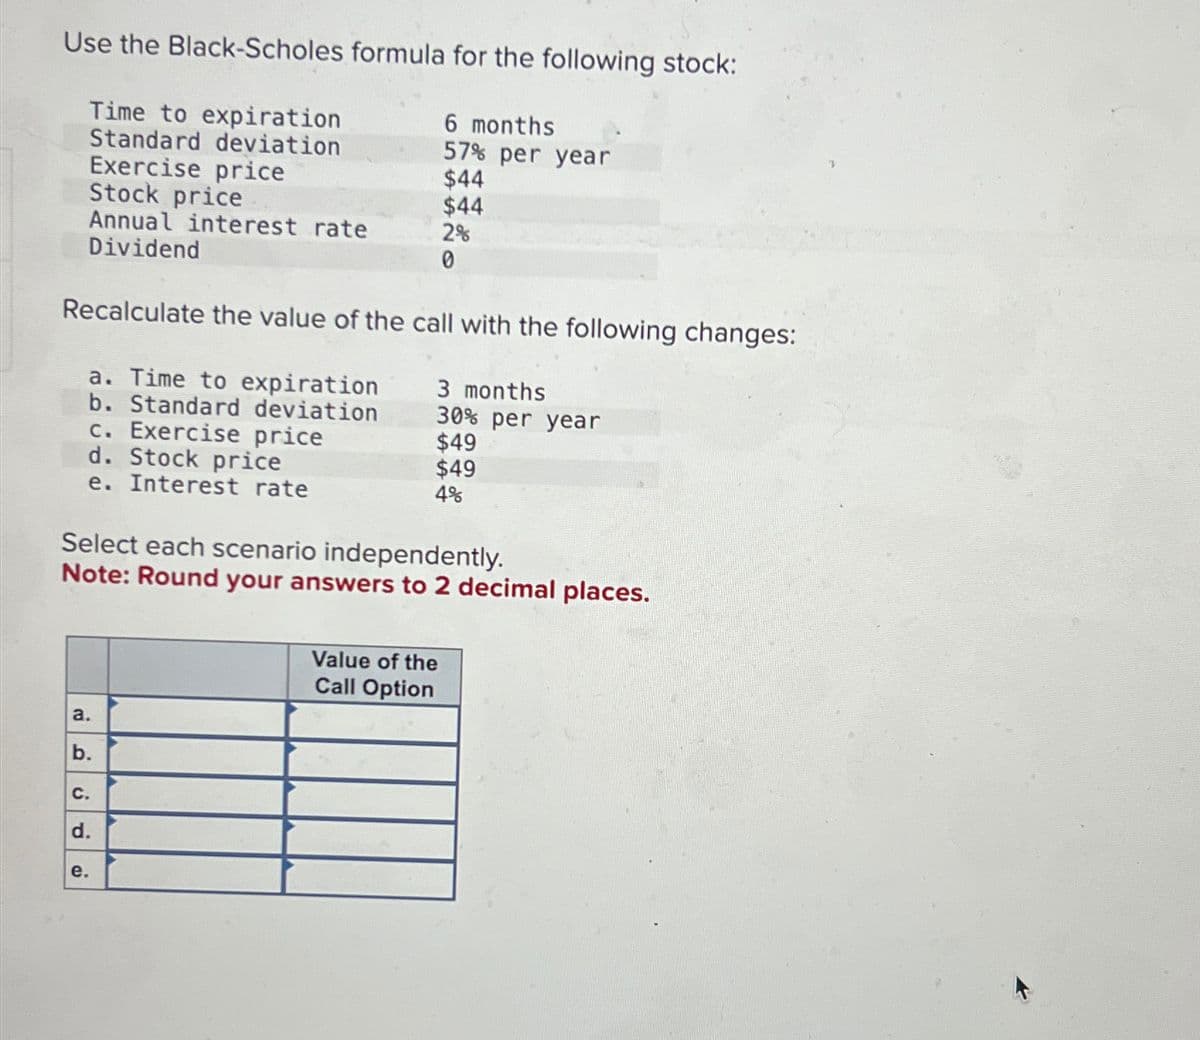 Use the Black-Scholes formula for the following stock:
Time to expiration
Standard deviation
Exercise price
Annual interest rate
Stock price
Dividend
6 months
57% per year
$44
$44
2%
0
Recalculate the value of the call with the following changes:
a. Time to expiration
b. Standard deviation
c. Exercise price
d. Stock price
e. Interest rate
3 months
30% per year
$49
$49
4%
Select each scenario independently.
Note: Round your answers to 2 decimal places.
a.
b.
C.
d.
e.
Value of the
Call Option